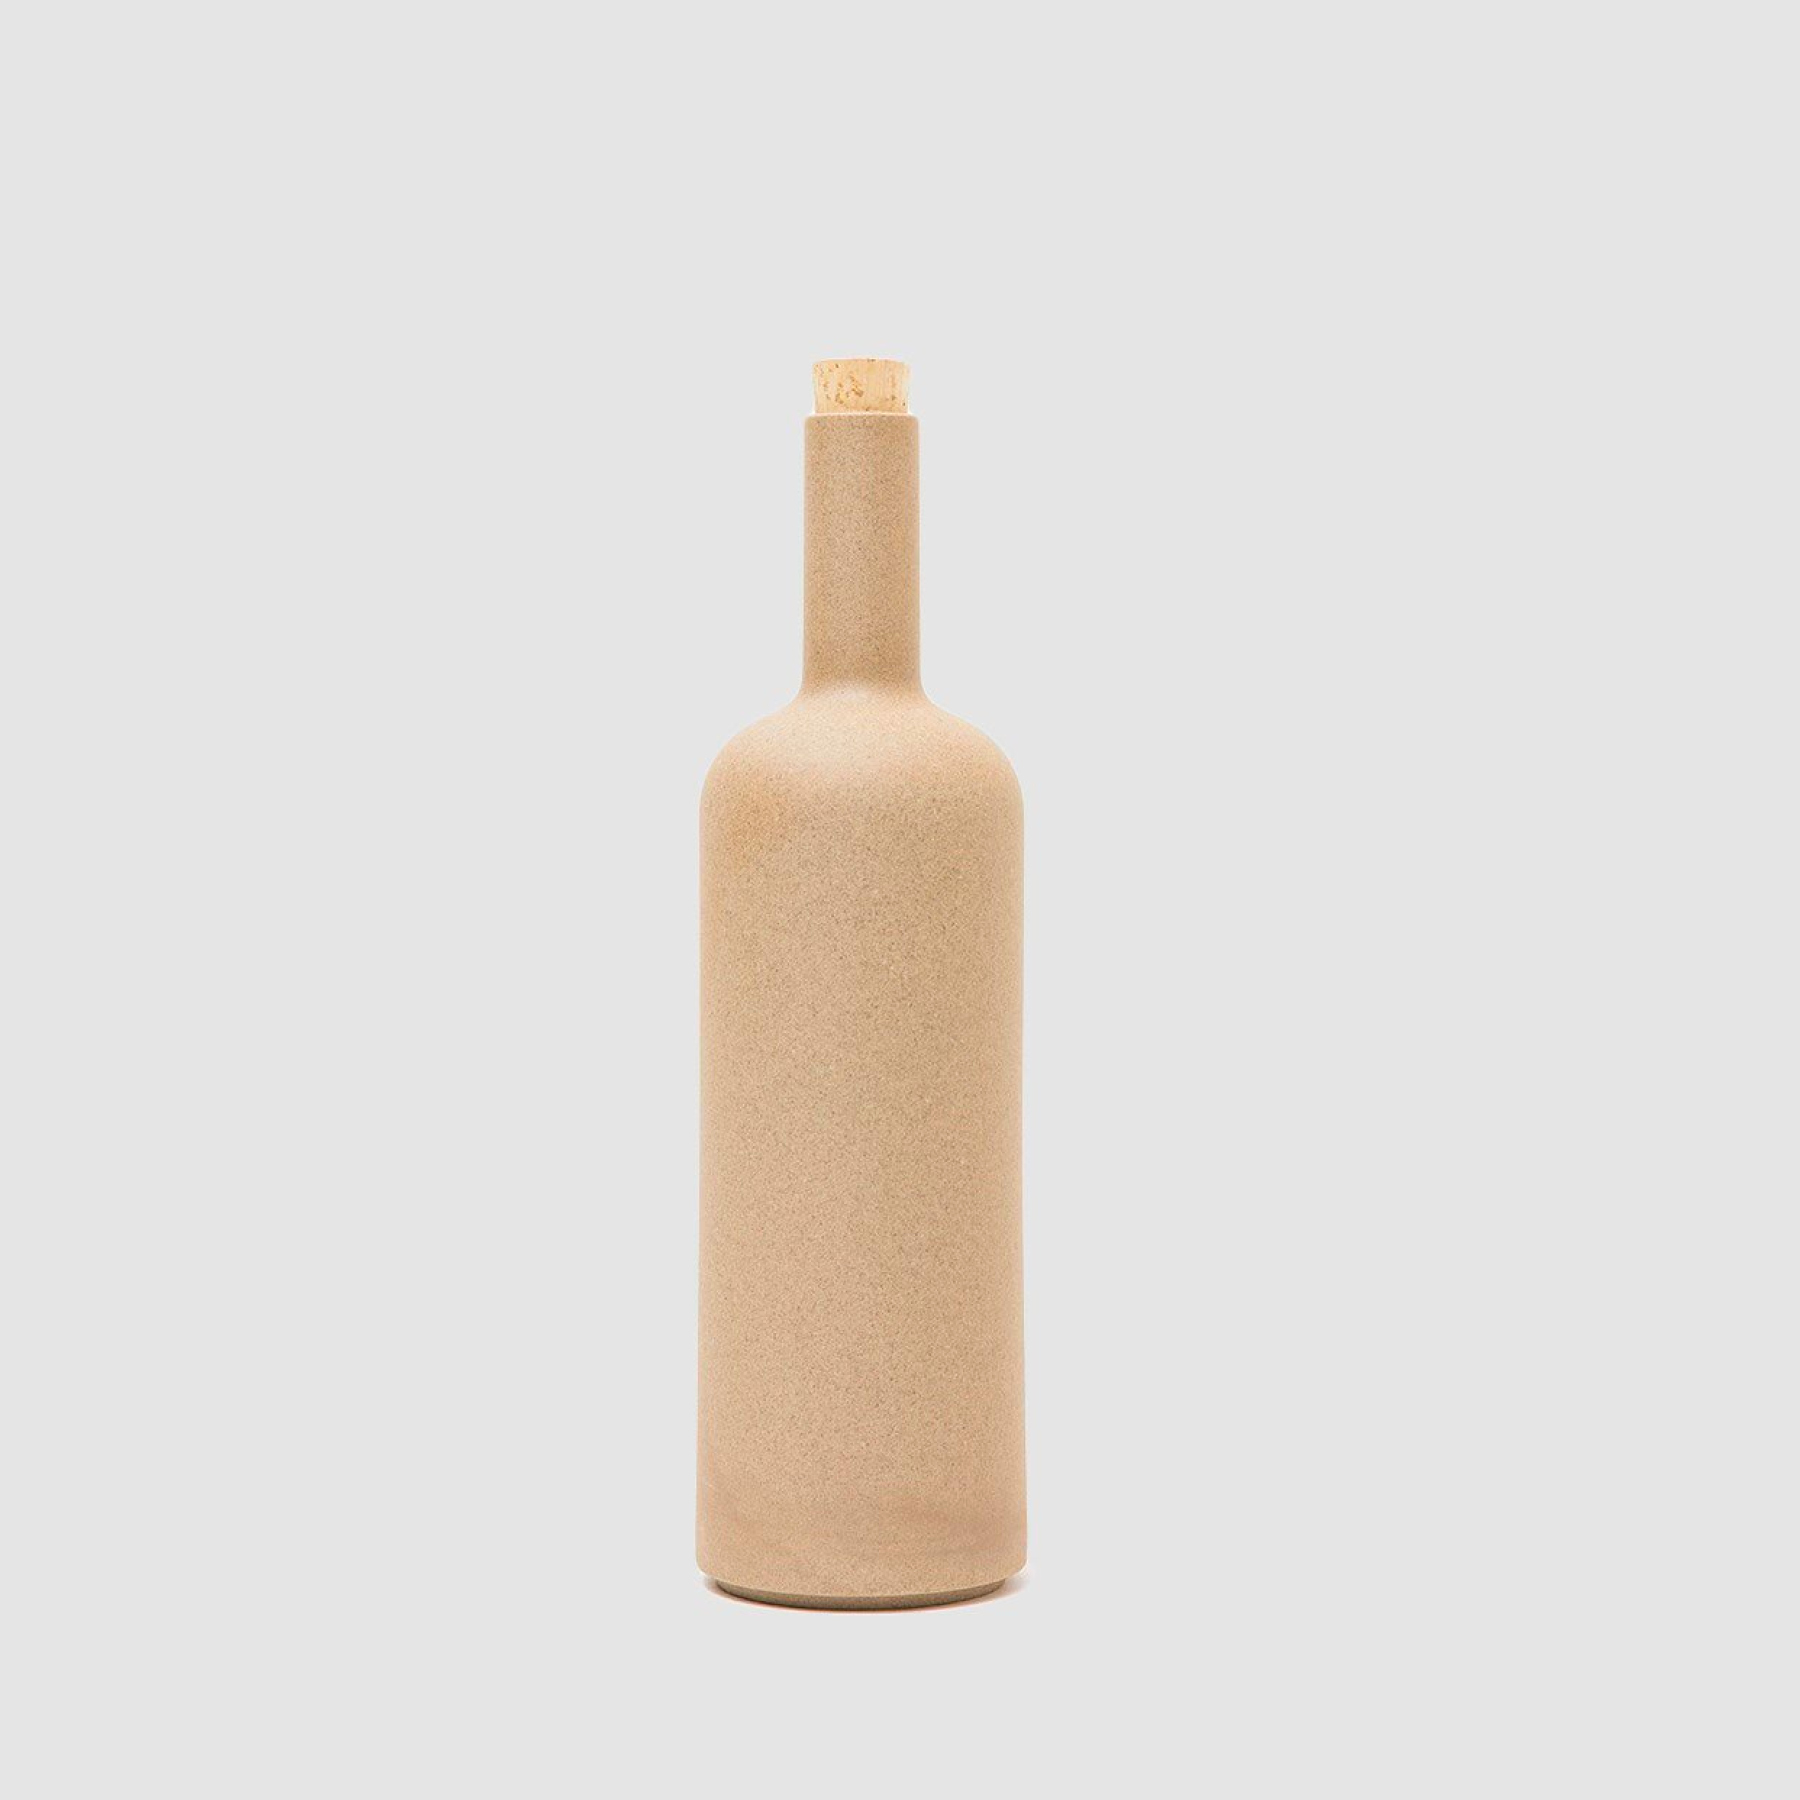 ALL-SORTS-OF-HASAMI-BOTTLE